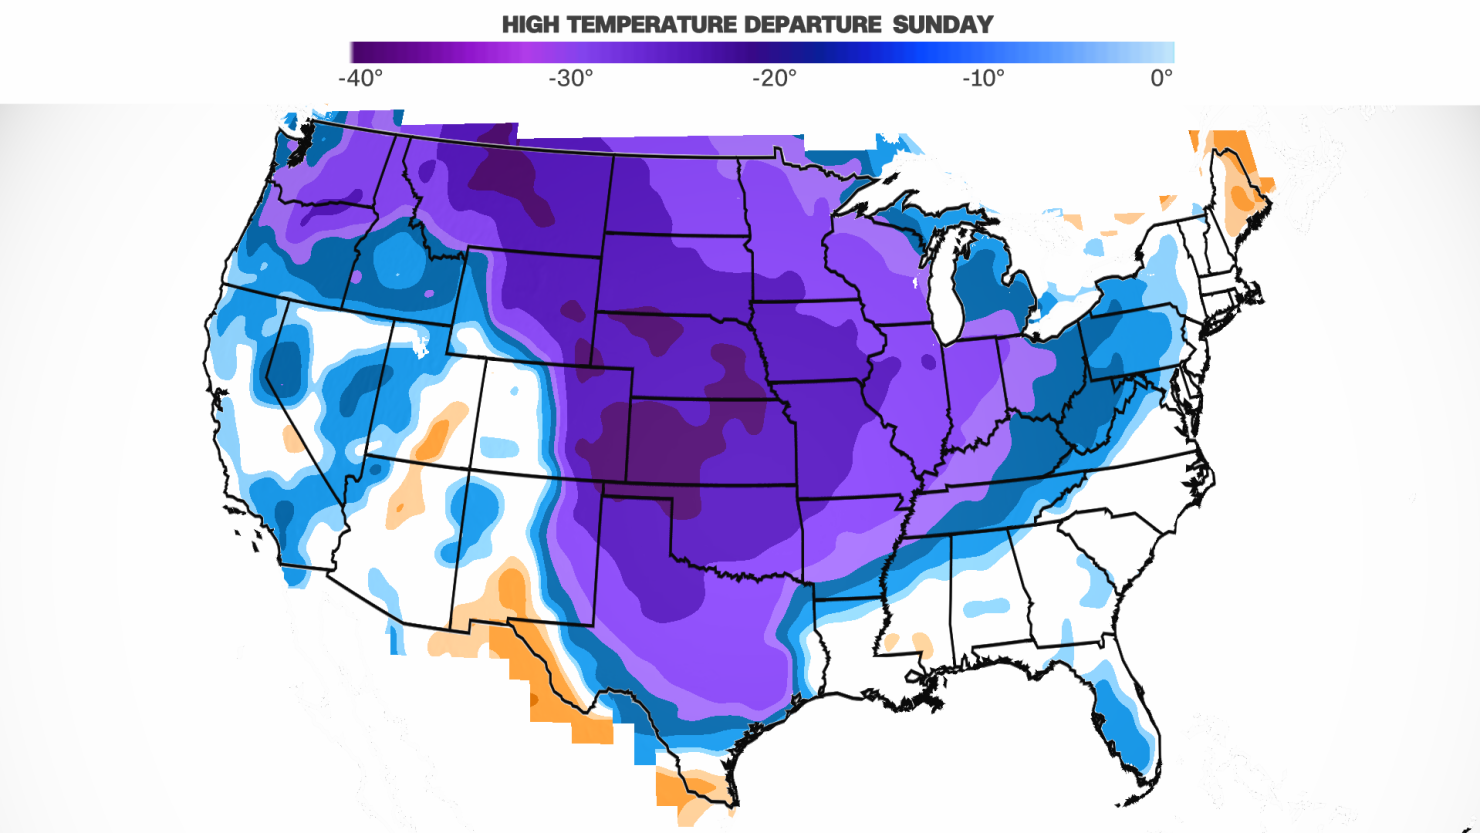 Temperatures will fall 30 and 40 degrees below normal by Sunday across the central US.